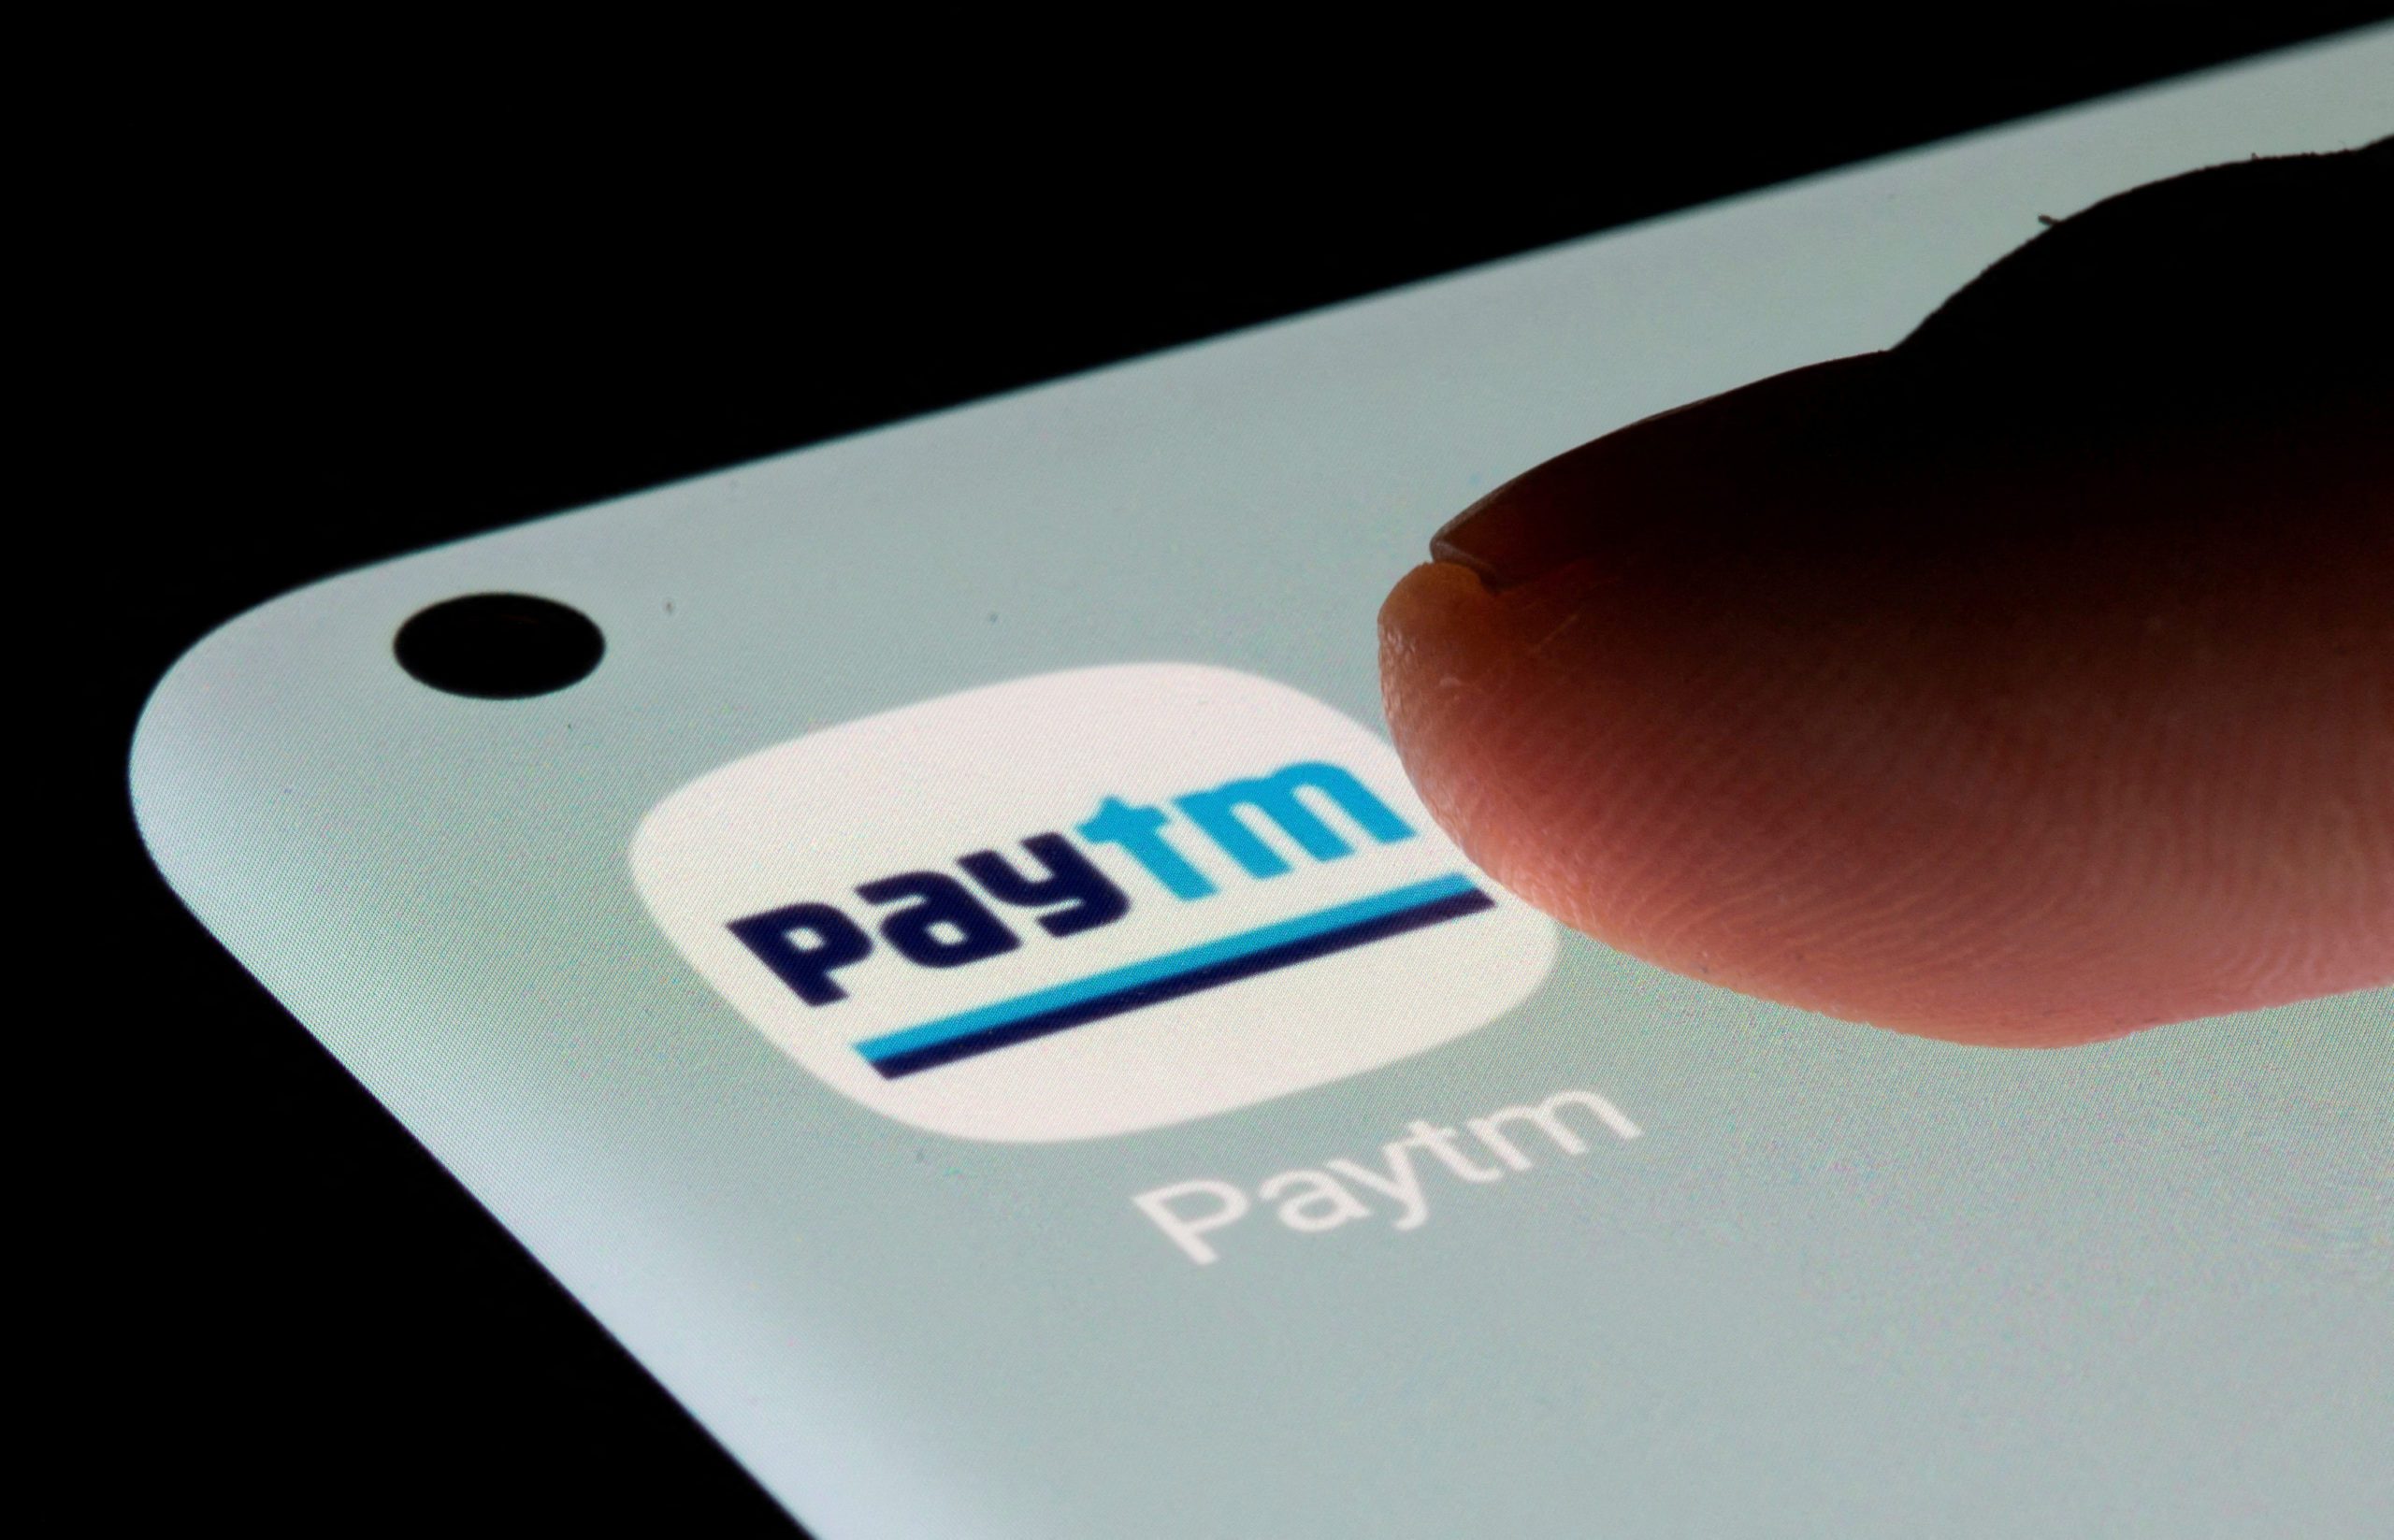 India's Paytm to curtail low-value personal loans after RBI clampdown